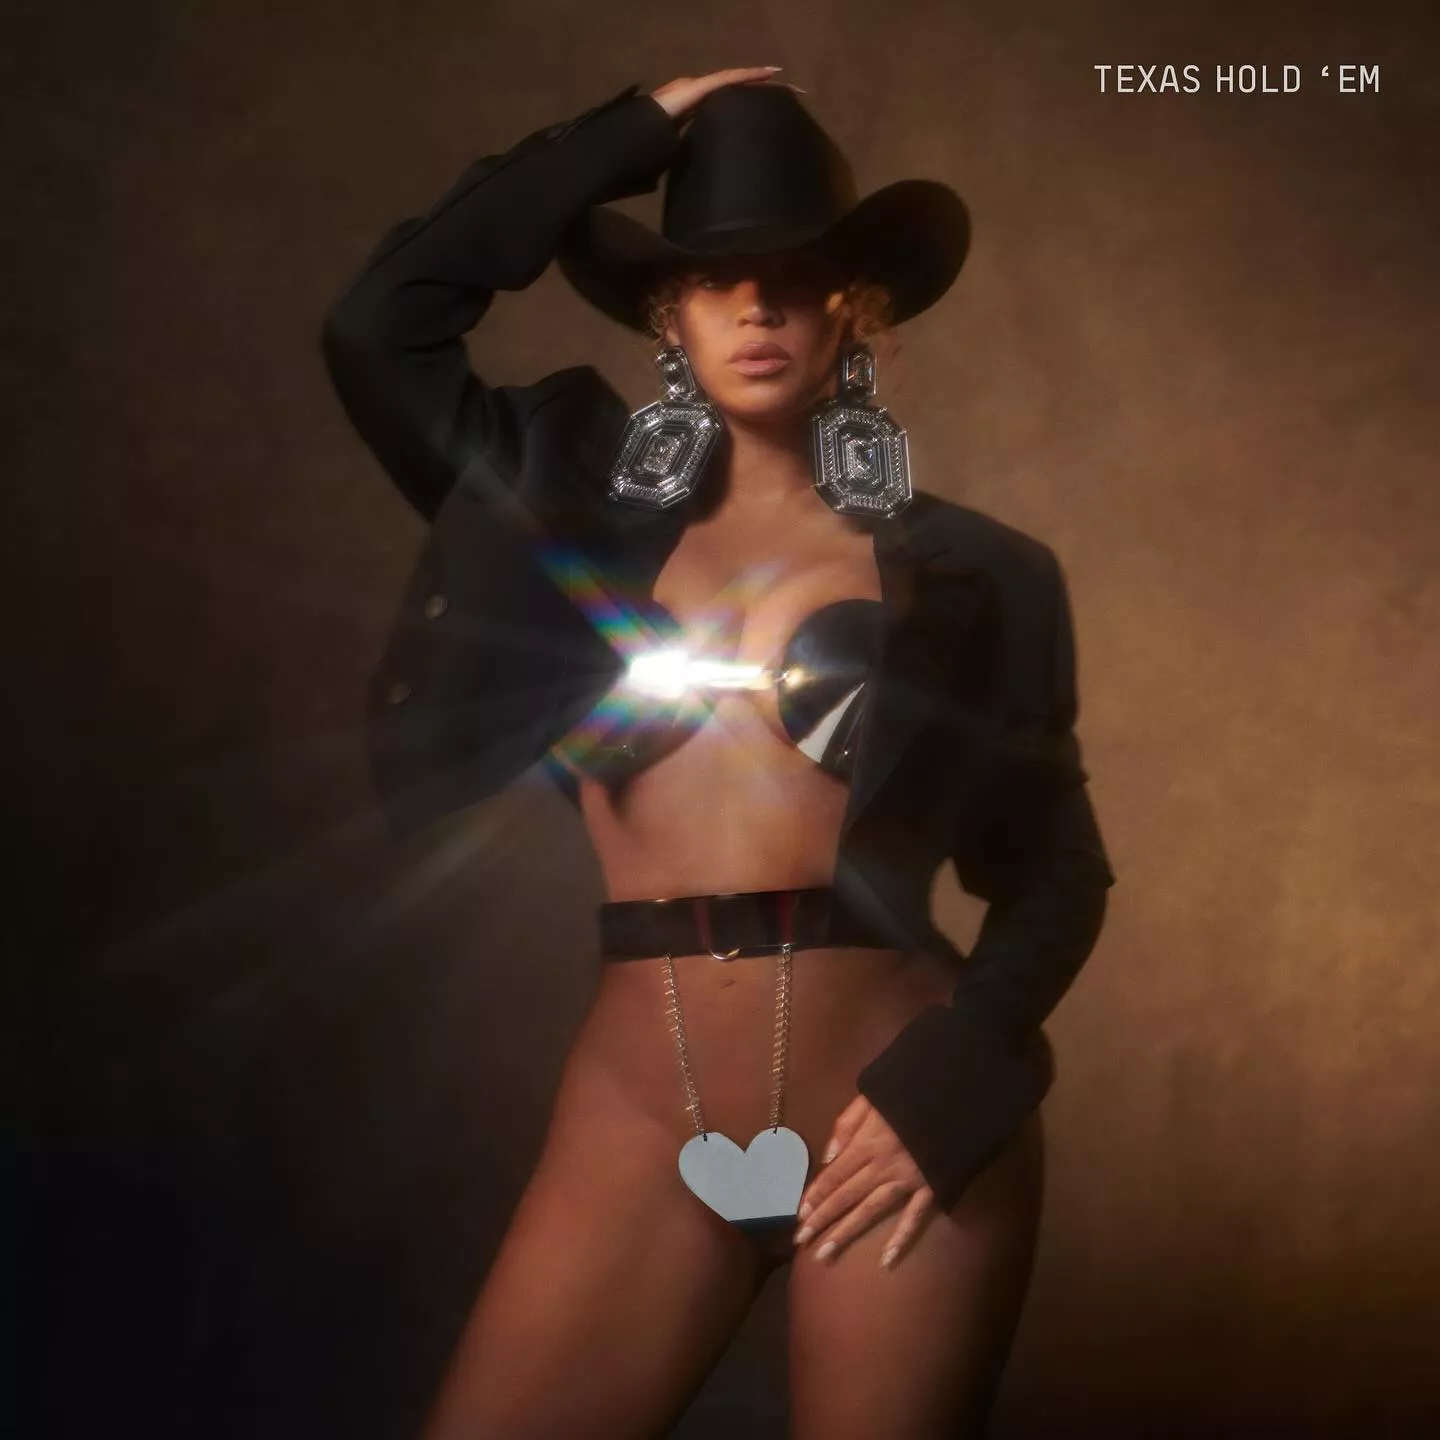 Beyonce's 'Texas Hold 'Em' cover art